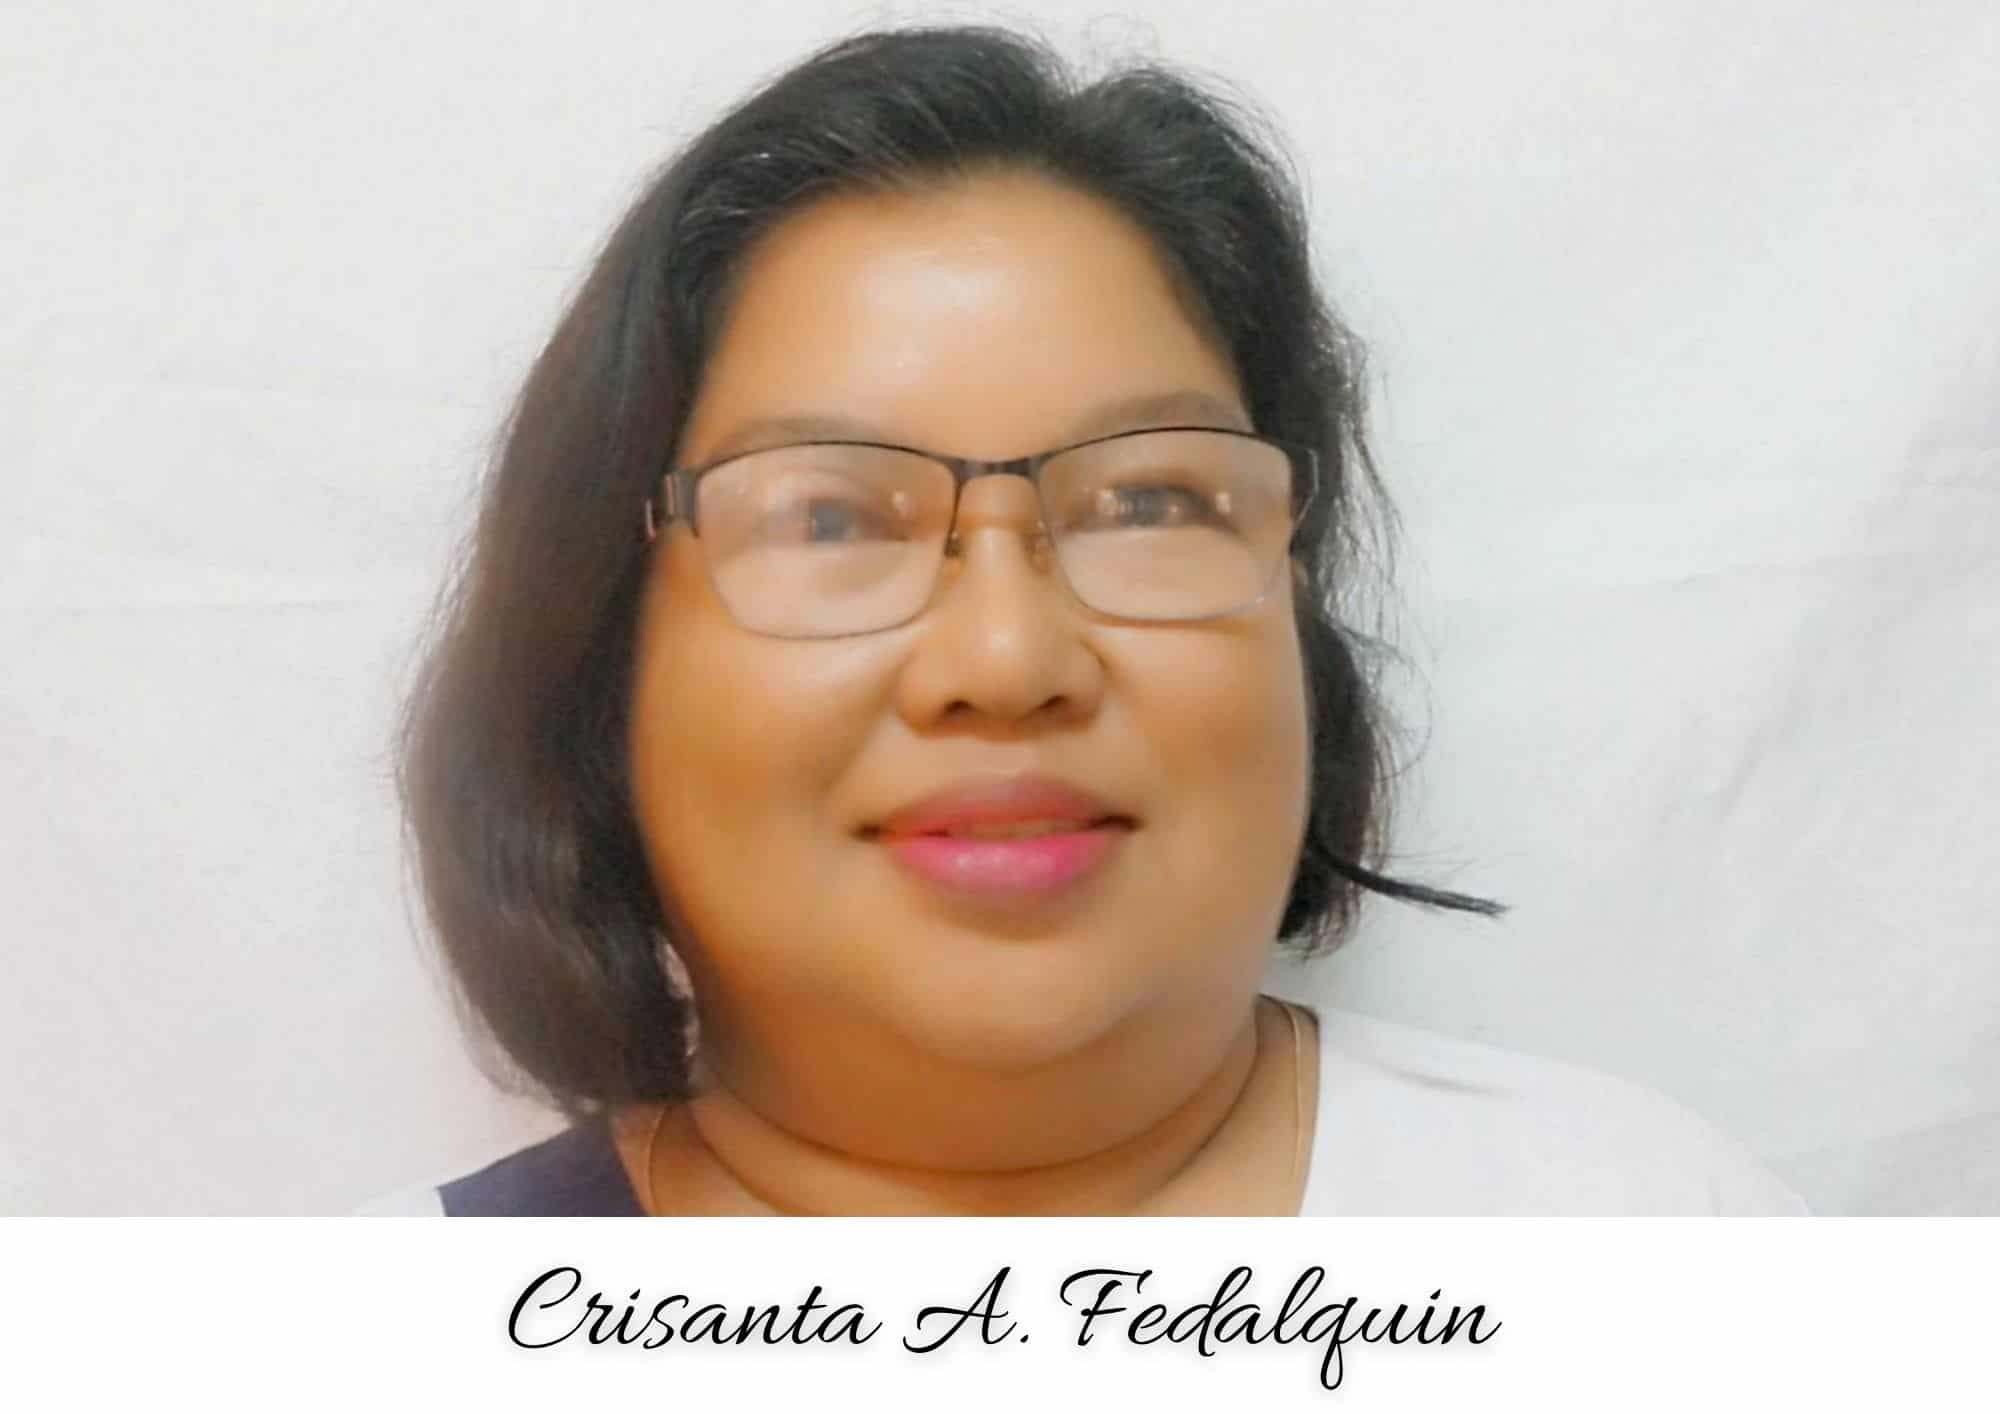 Certified PainFree Provider LEVEL 1 - crisanta a. fedalquin